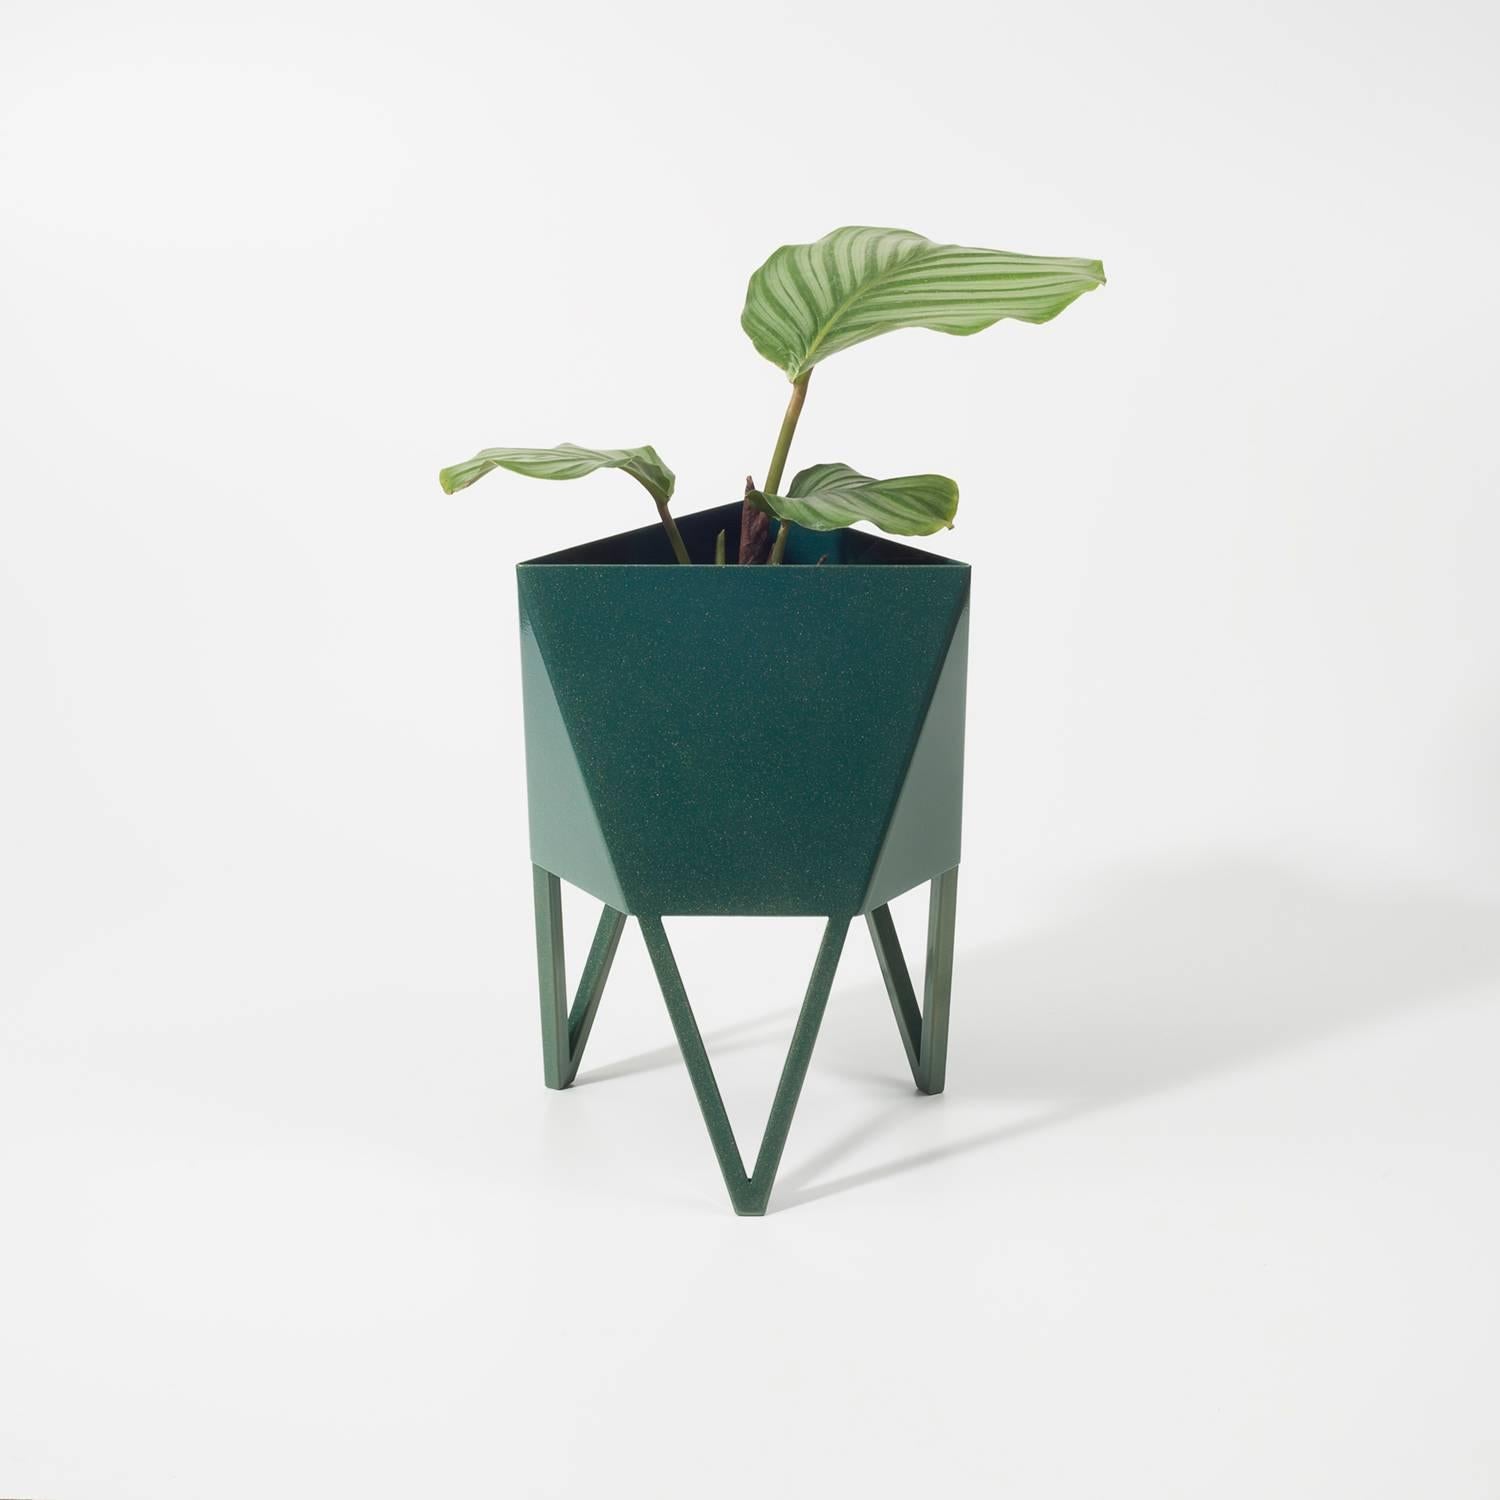 Introducing Force/Collide's signature planter in subeam bluegreen. Using a seamless brake-forming technique, one sheet of steel is wrapped into a unique geometric pattern that's triangular at the top and hexagonal at the base. Three V-shaped legs